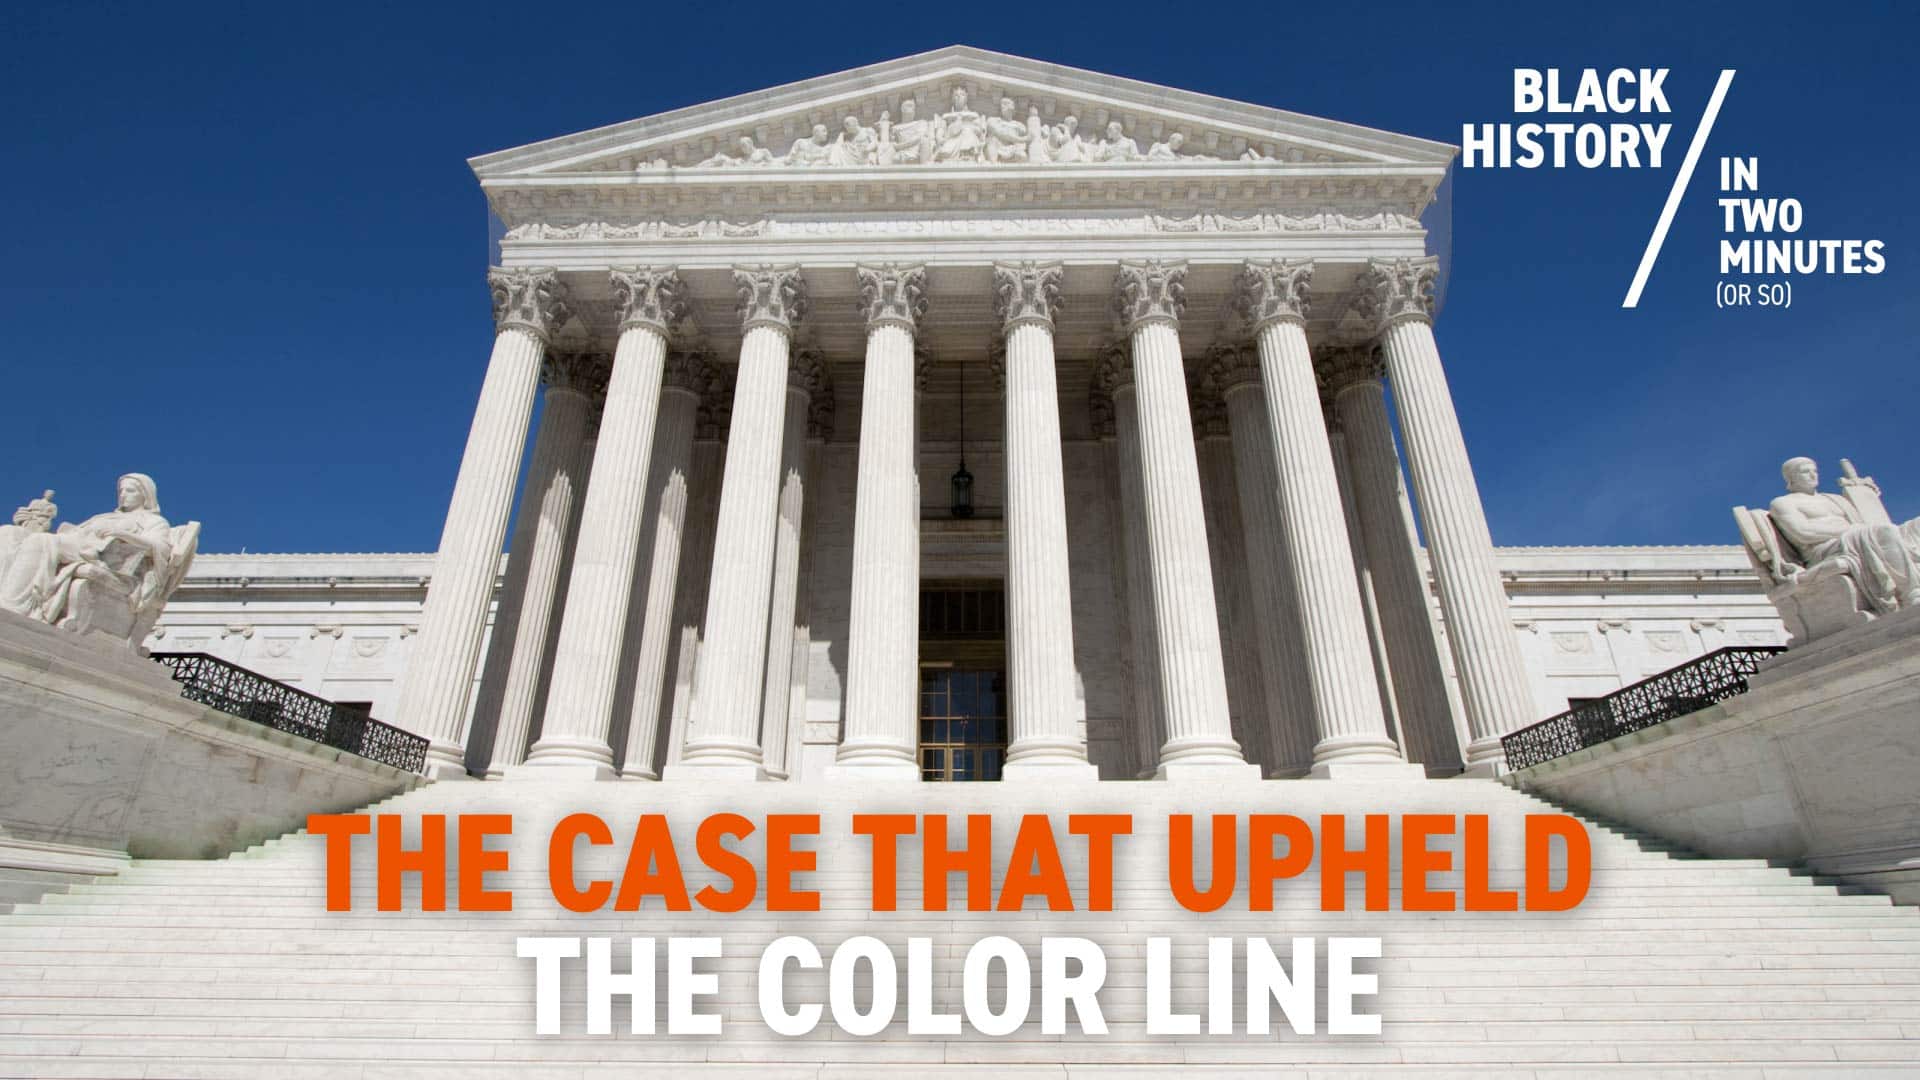 Separate But Equal: Homer Plessy and the Case That Upheld the Color Line